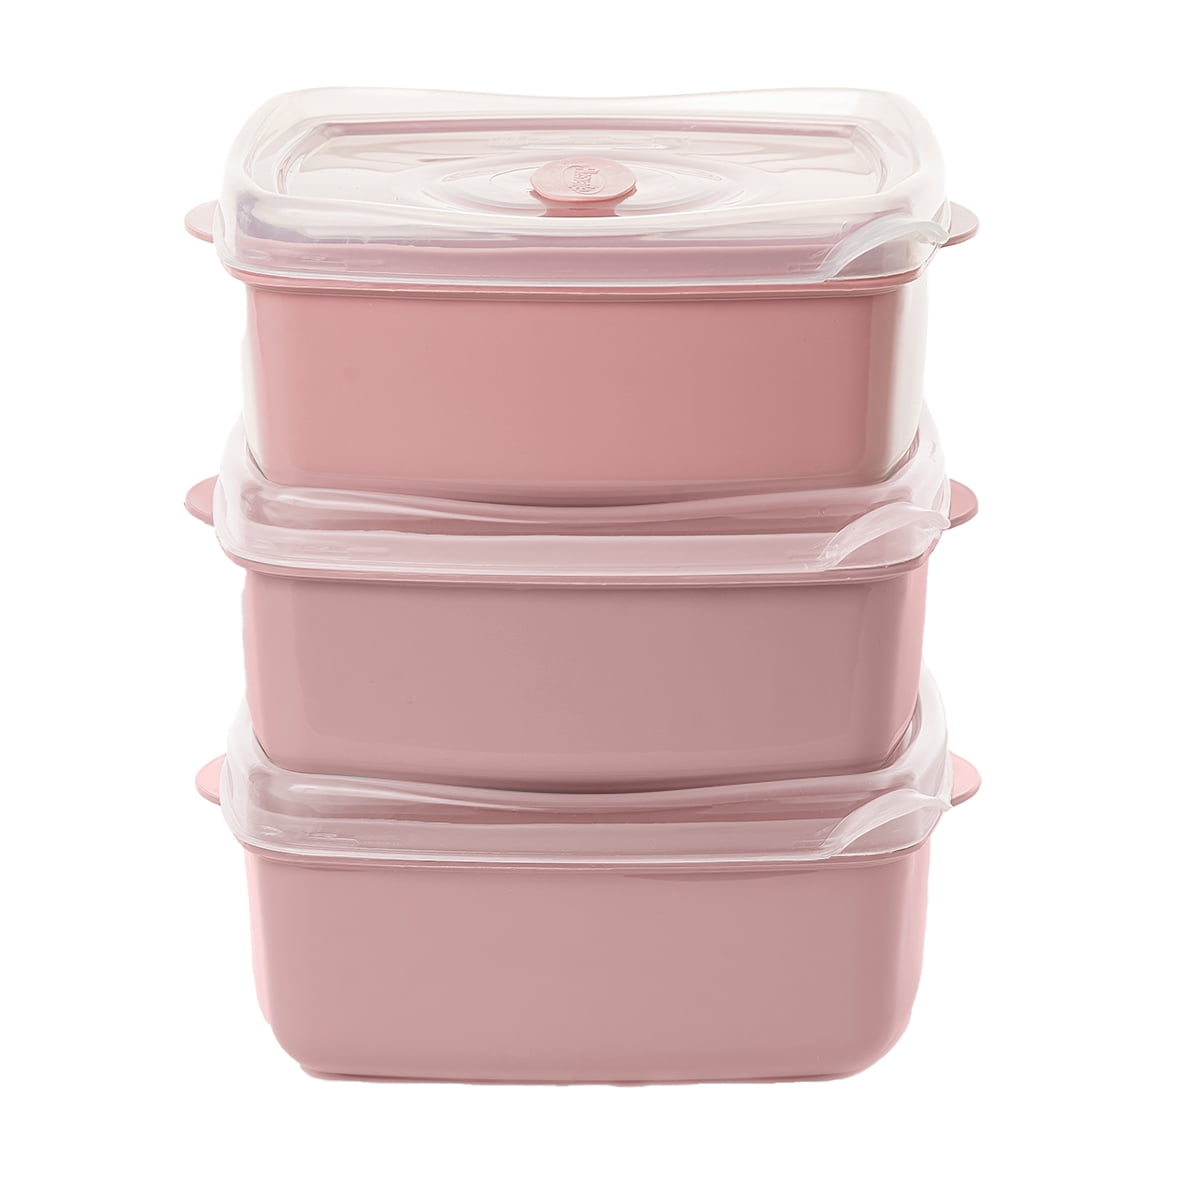 Tupperware Brand Vent 'N Serve Container Set - 3 Small Round Containers to  Prep, Freeze & Reheat Meals + Lids - Dishwasher, Microwave & Freezer Safe 